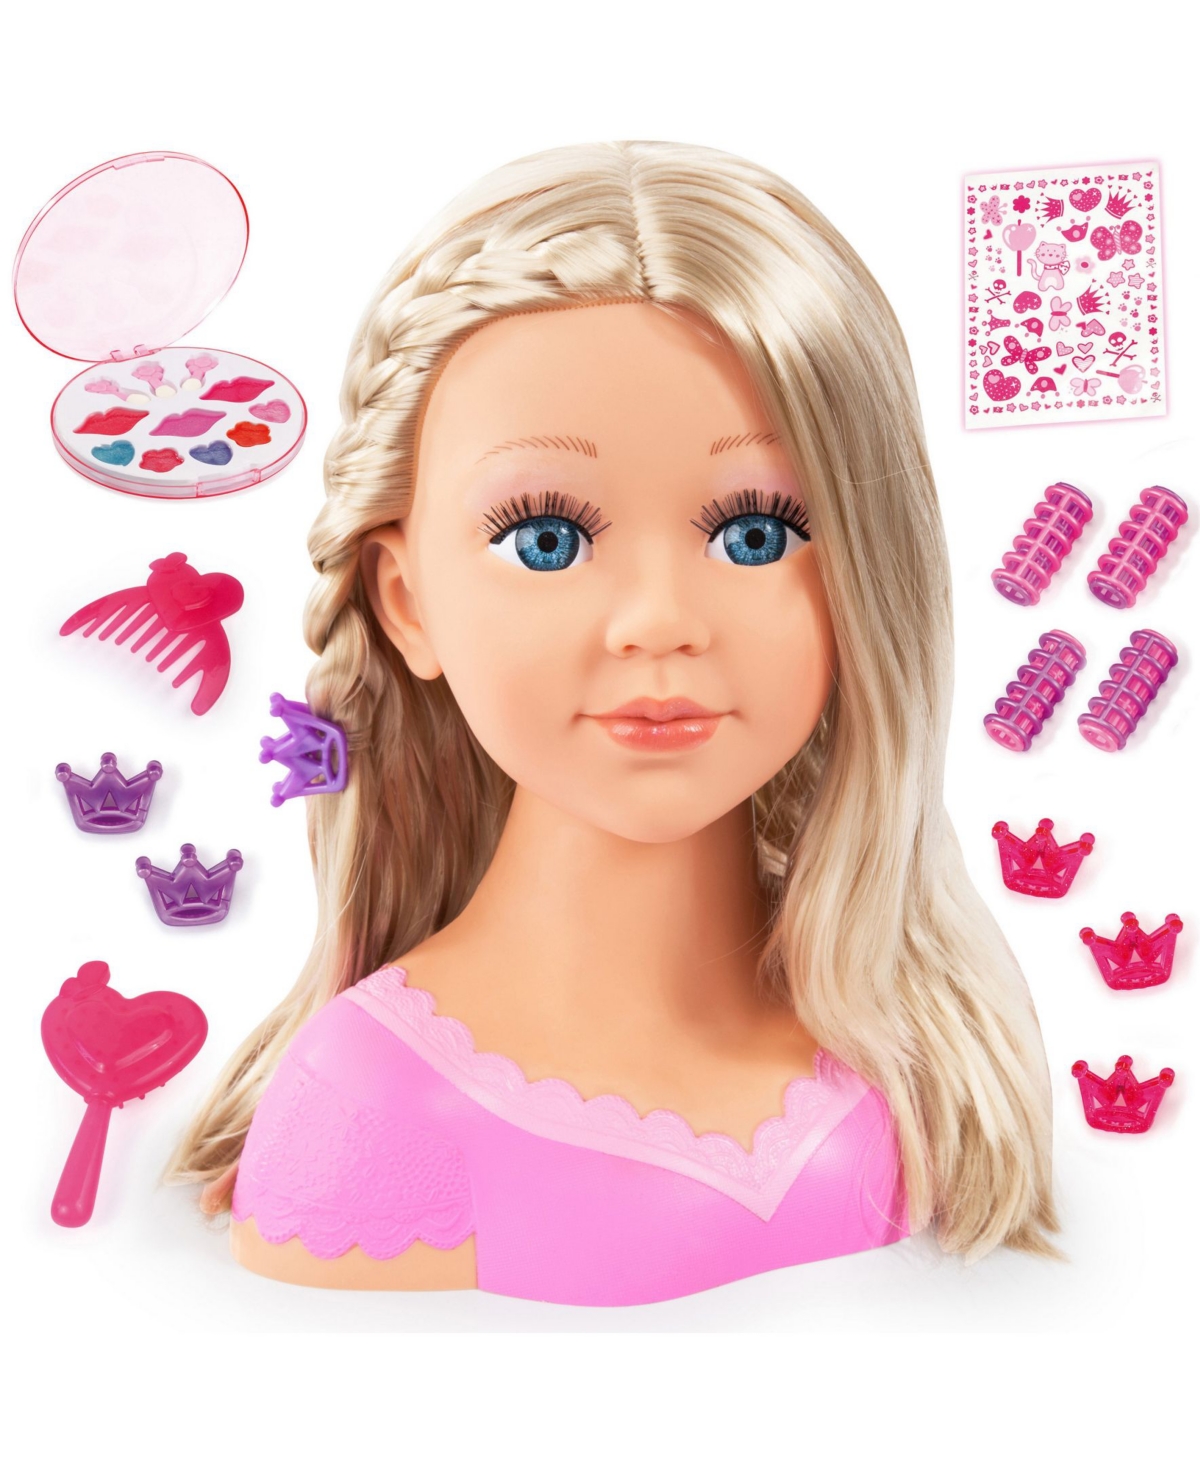 Redbox Charlene Super Model Blonde Styling Head With Makeup In Multi